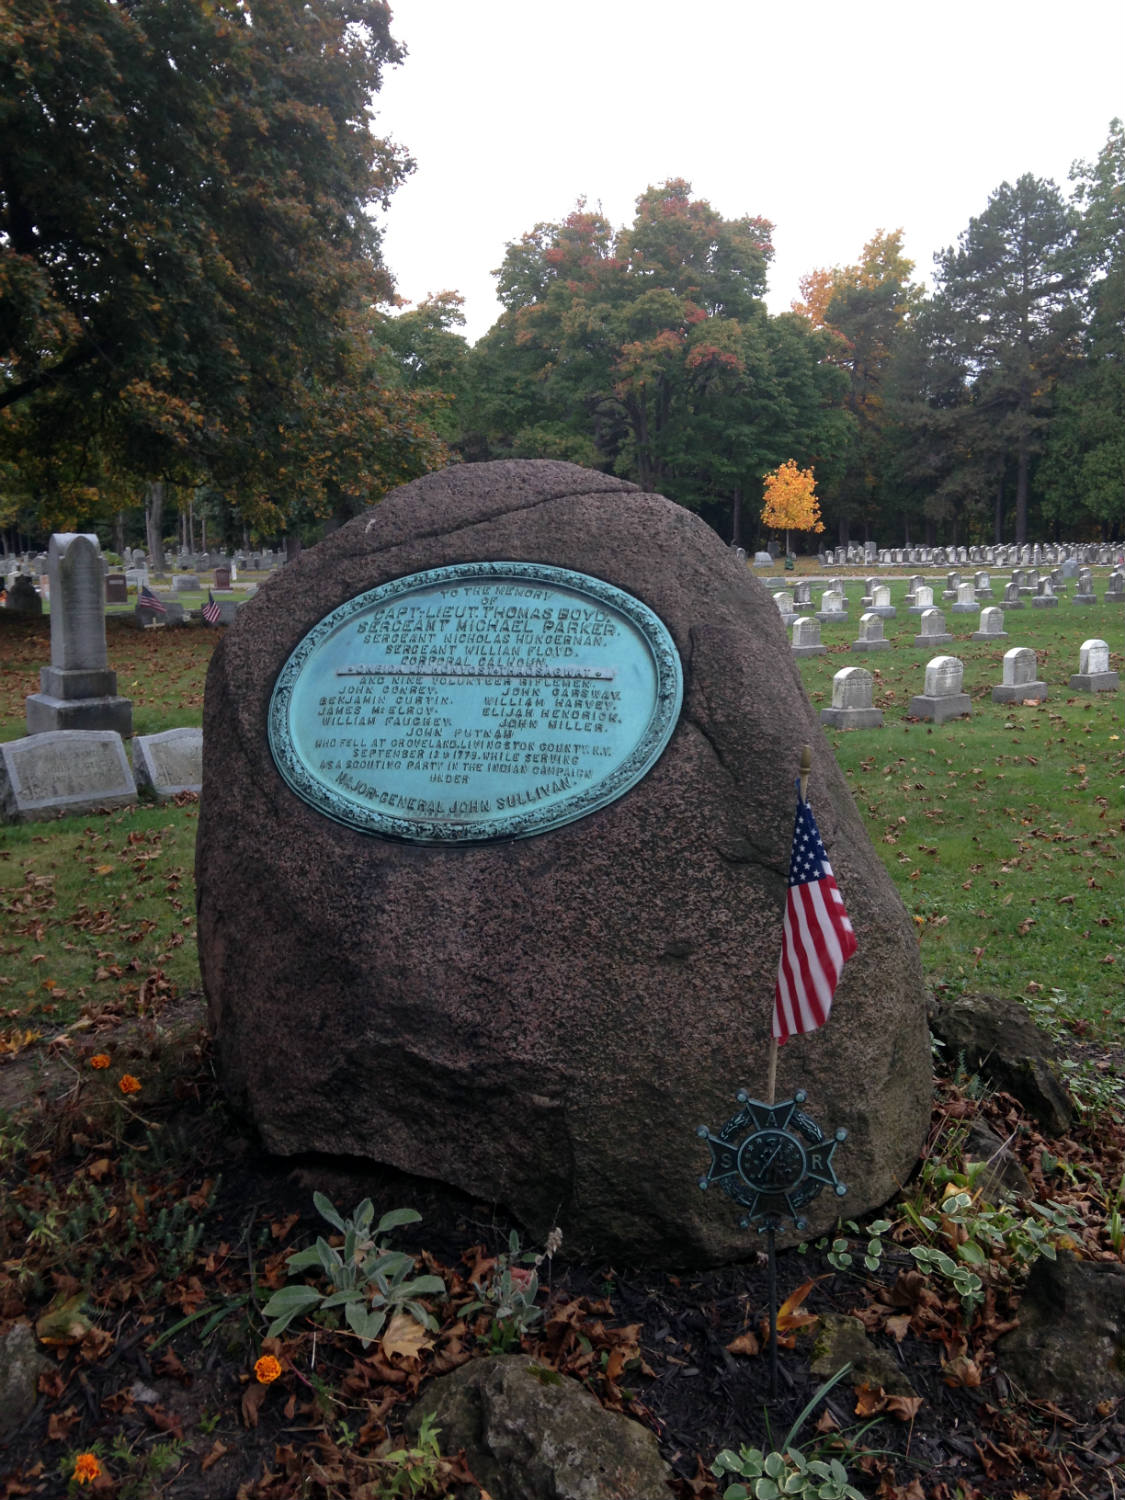 Memorial Stone in Mt. Hope Cemetery in Rochester, NY for all those who died in the ambush